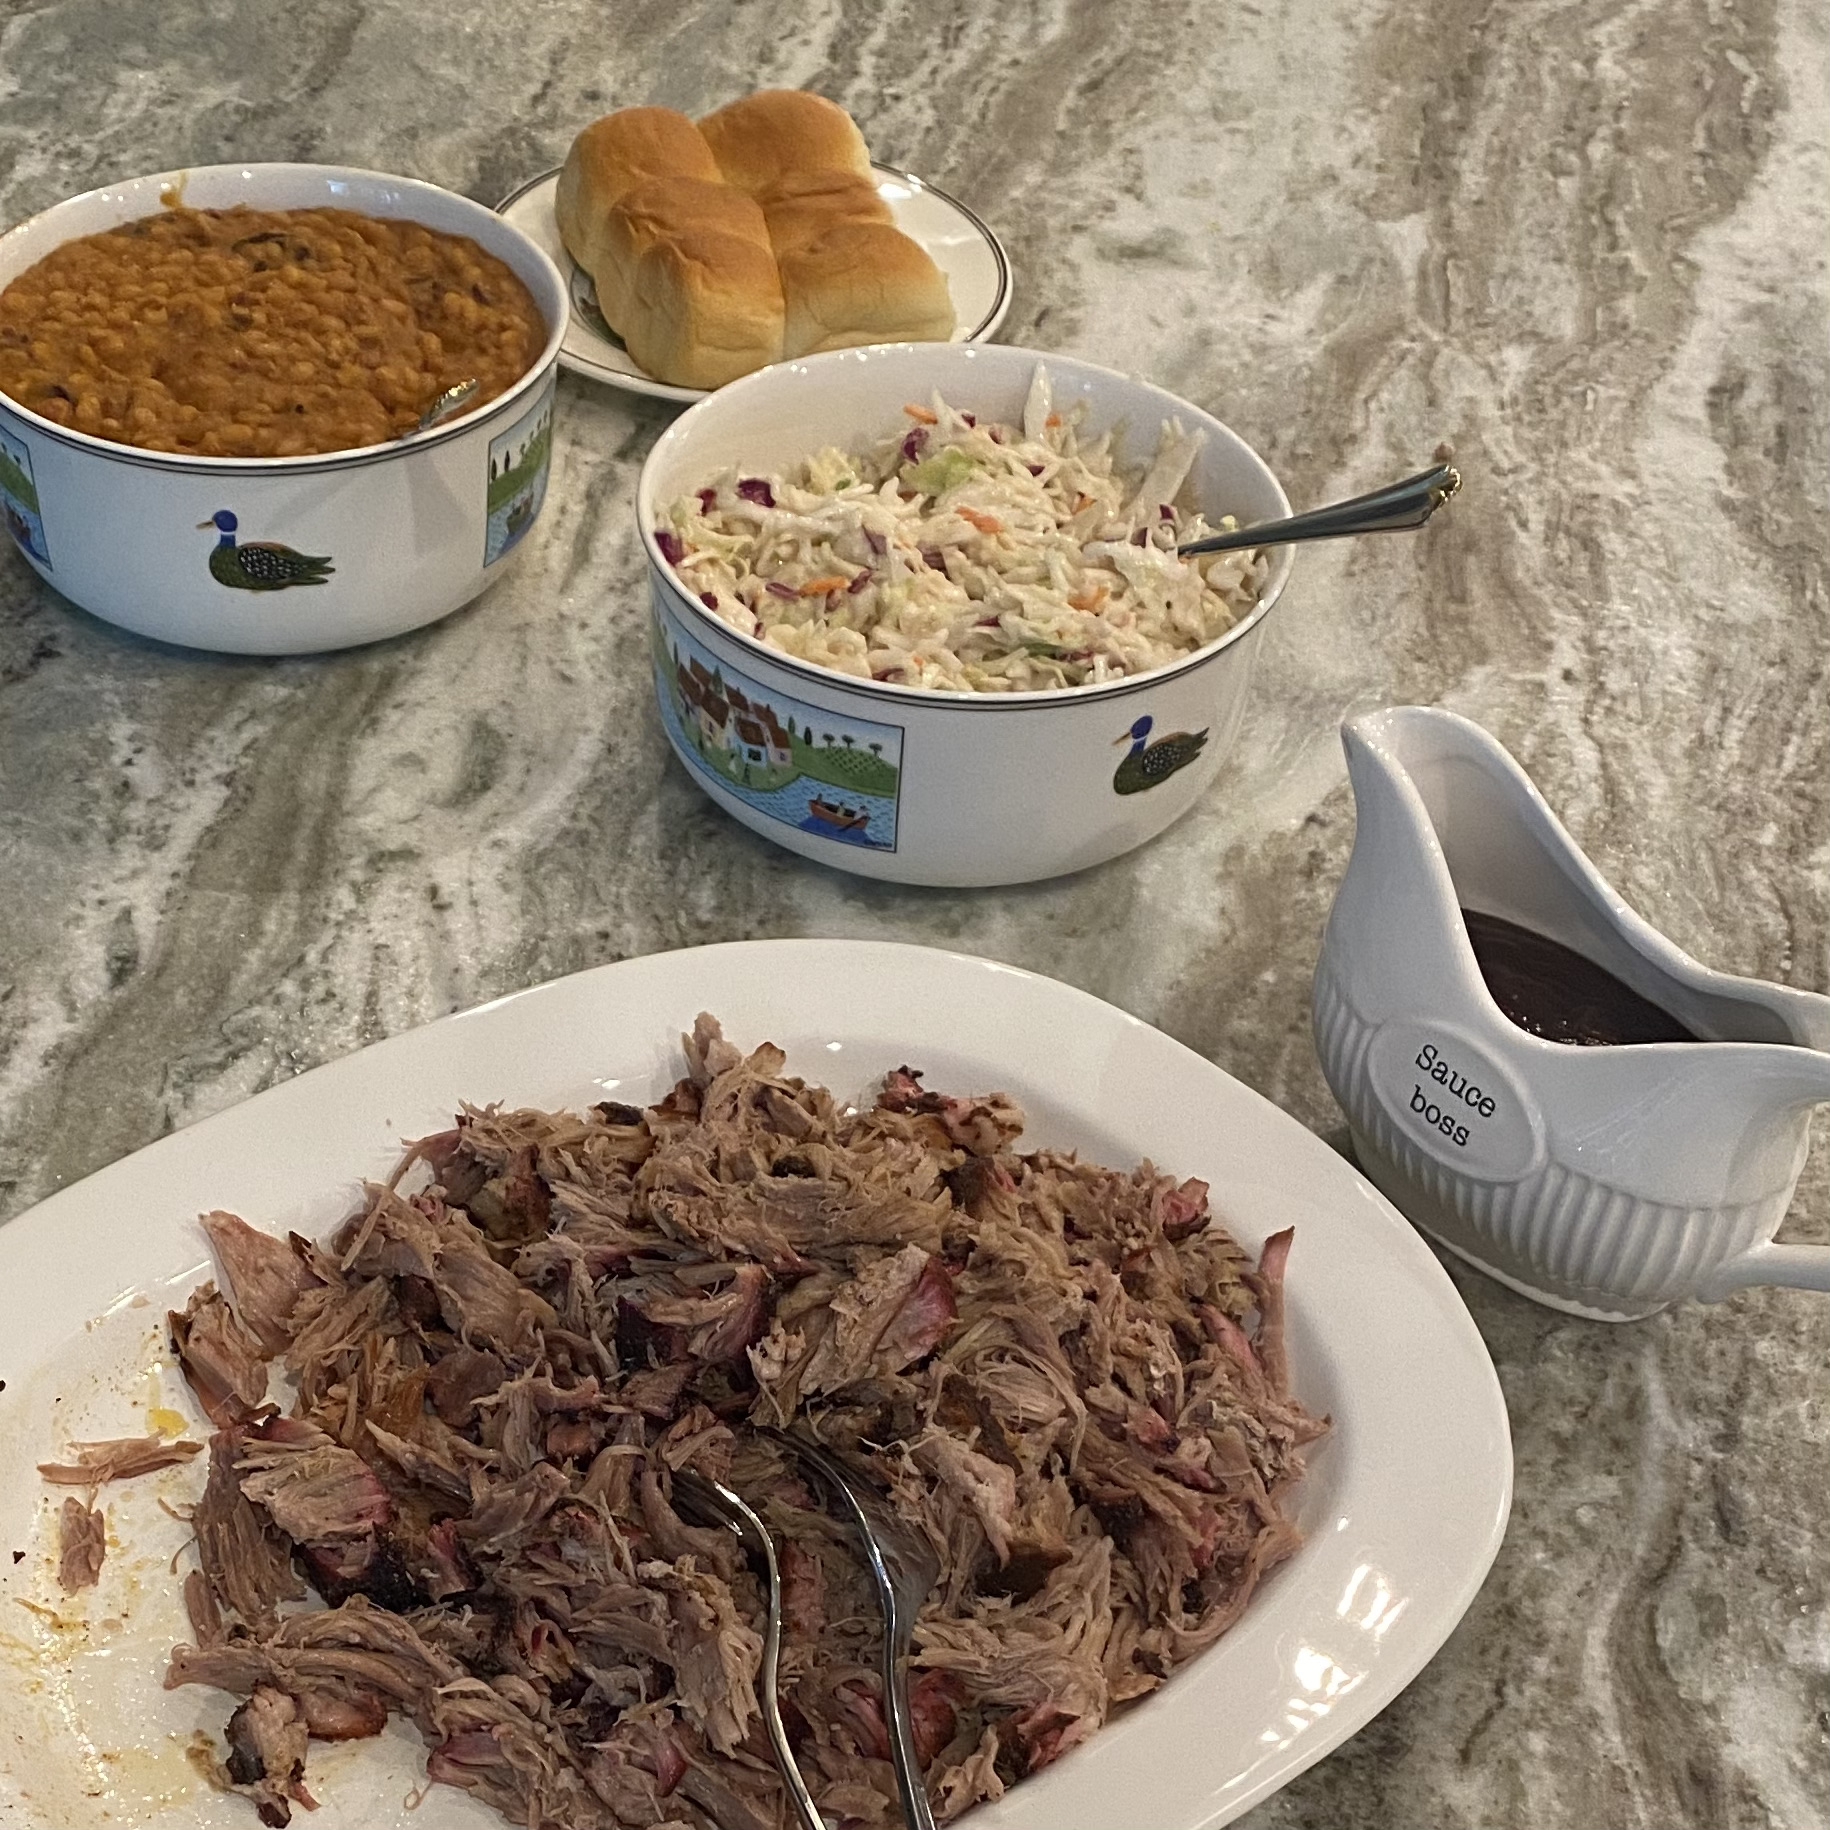 pulled pork on a plate, a bowl of beans, a bowl of coleslaw, a gravy boat with barbecue sauce and buns